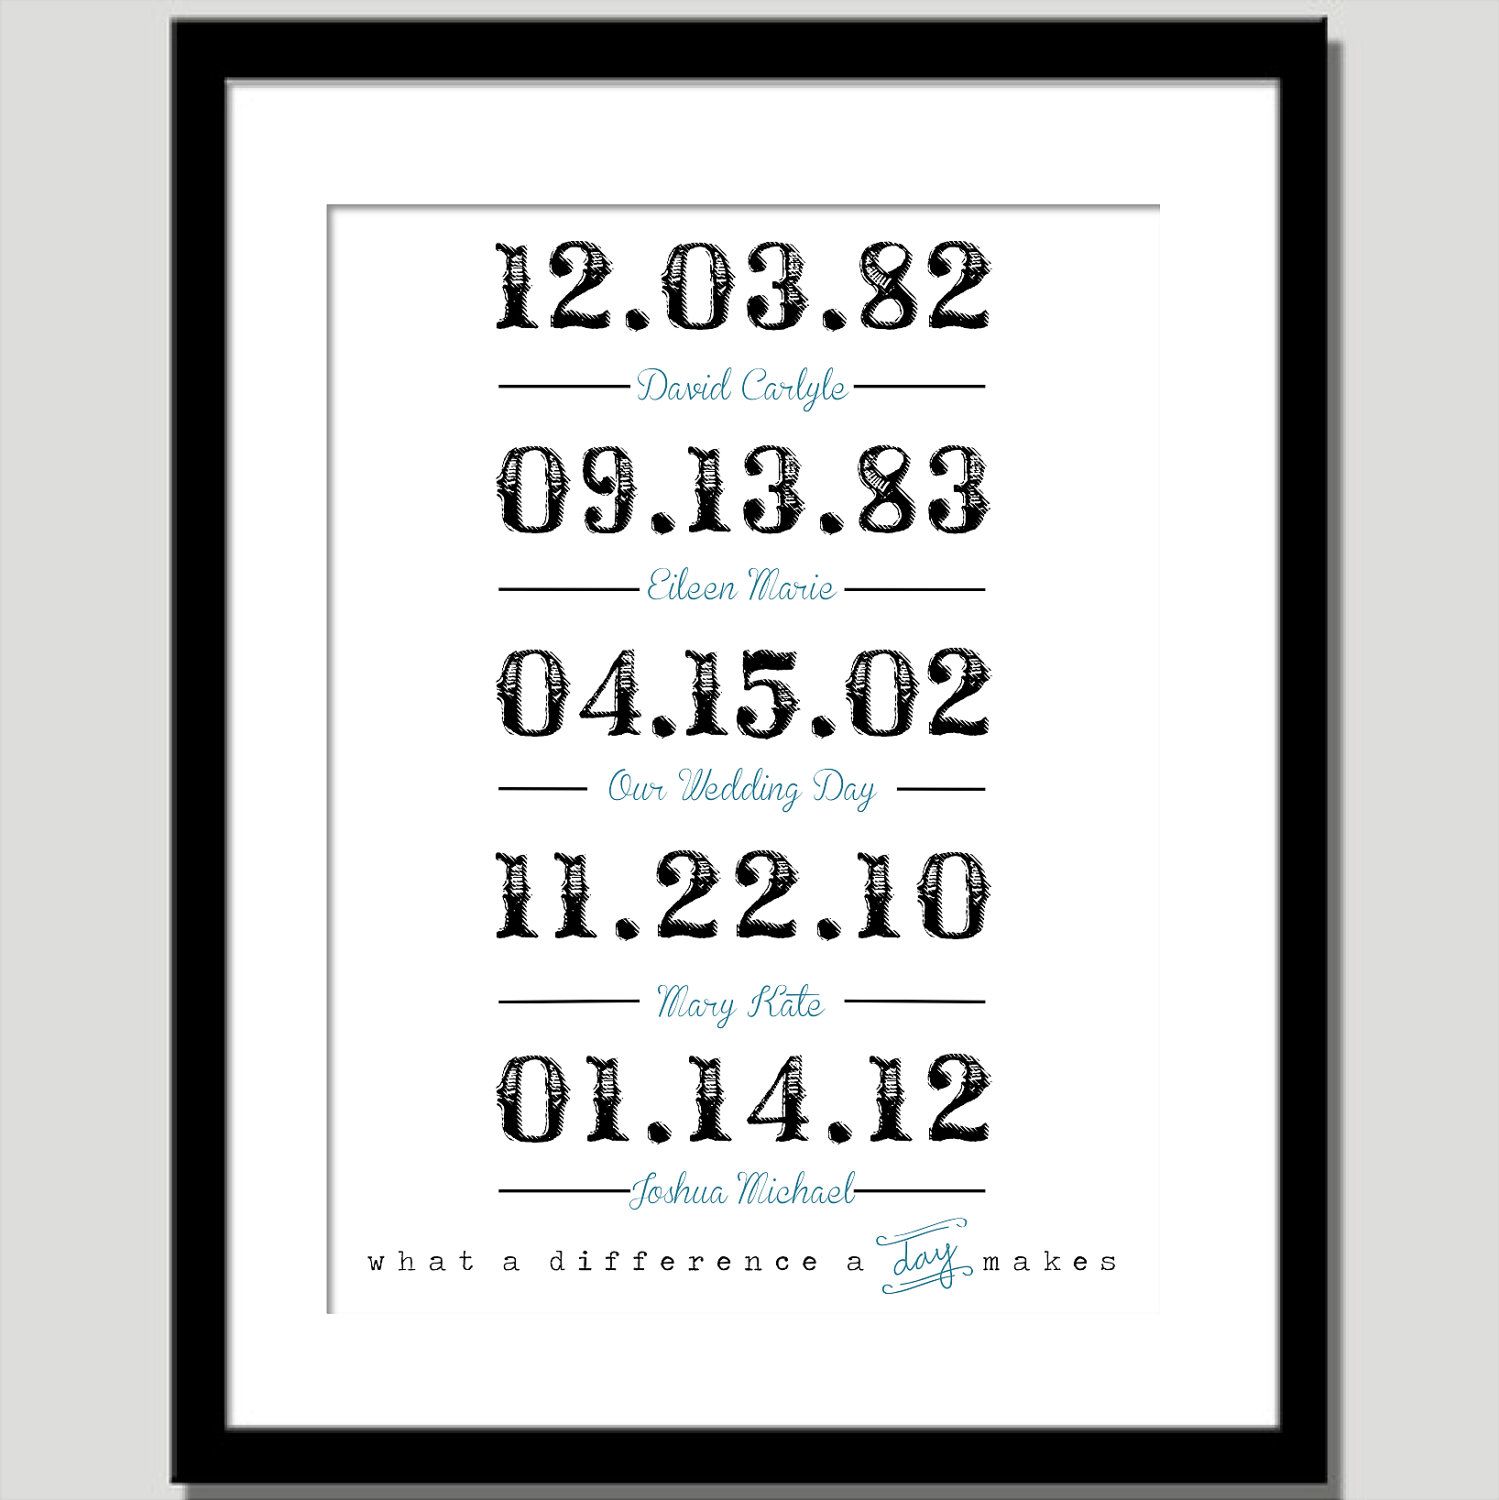 Neat idea- important dates, and the bottom quote says, "What a difference a